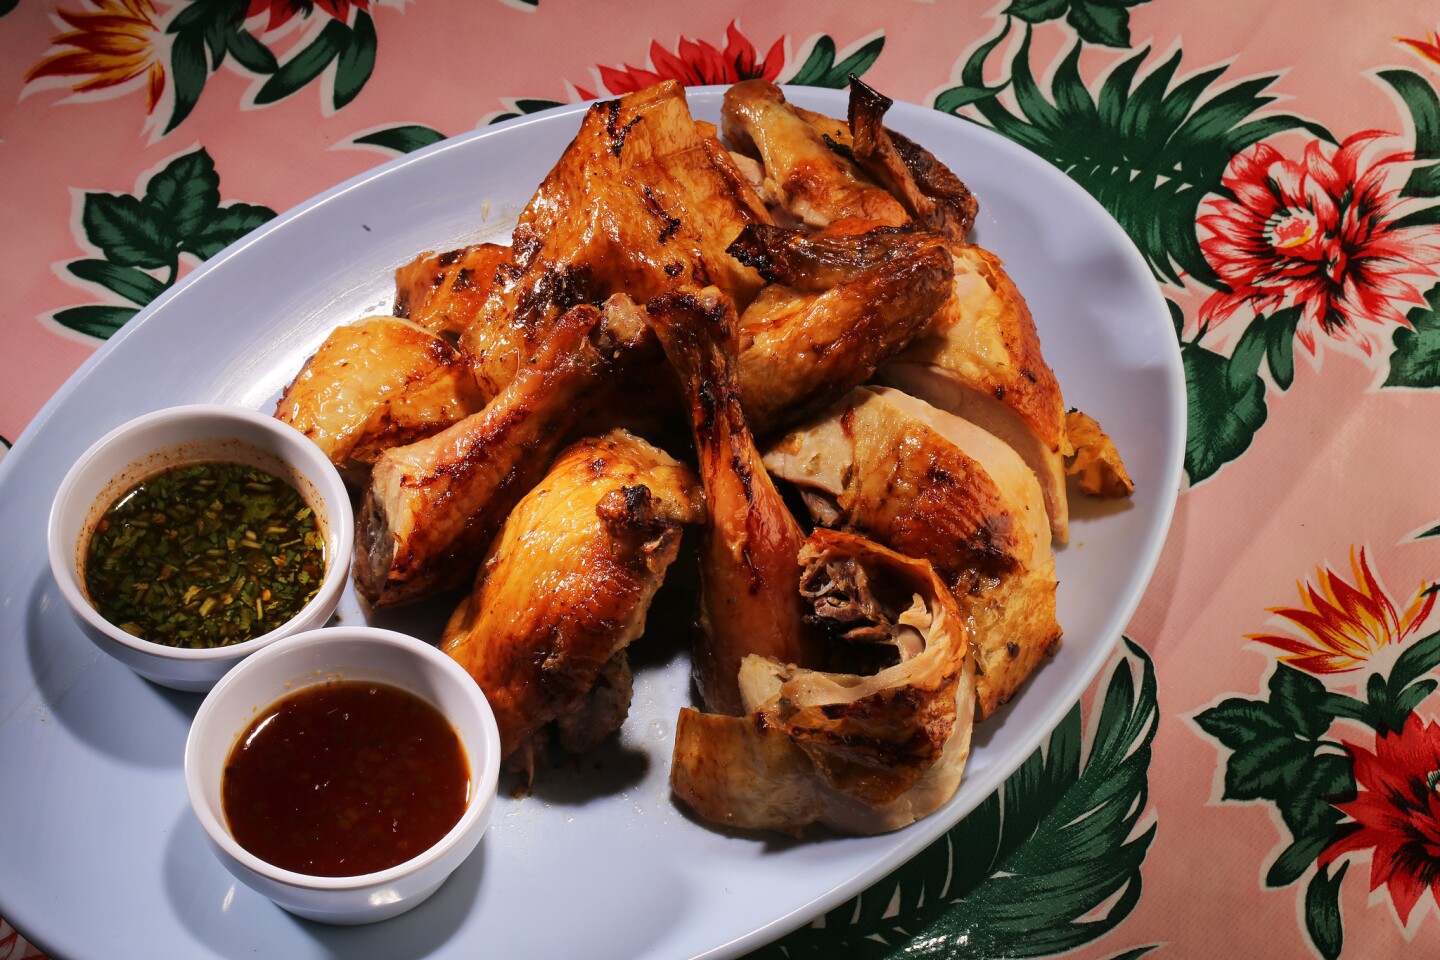 Kai Yaang is roasted Mary's natural chicken stuffed with lemongrass, garlic, pepper and cilantro and served with spicy/sweet/sour and tamarind dipping sauces. Half bird sells for $14.00 and whole bird sells for $25.00.